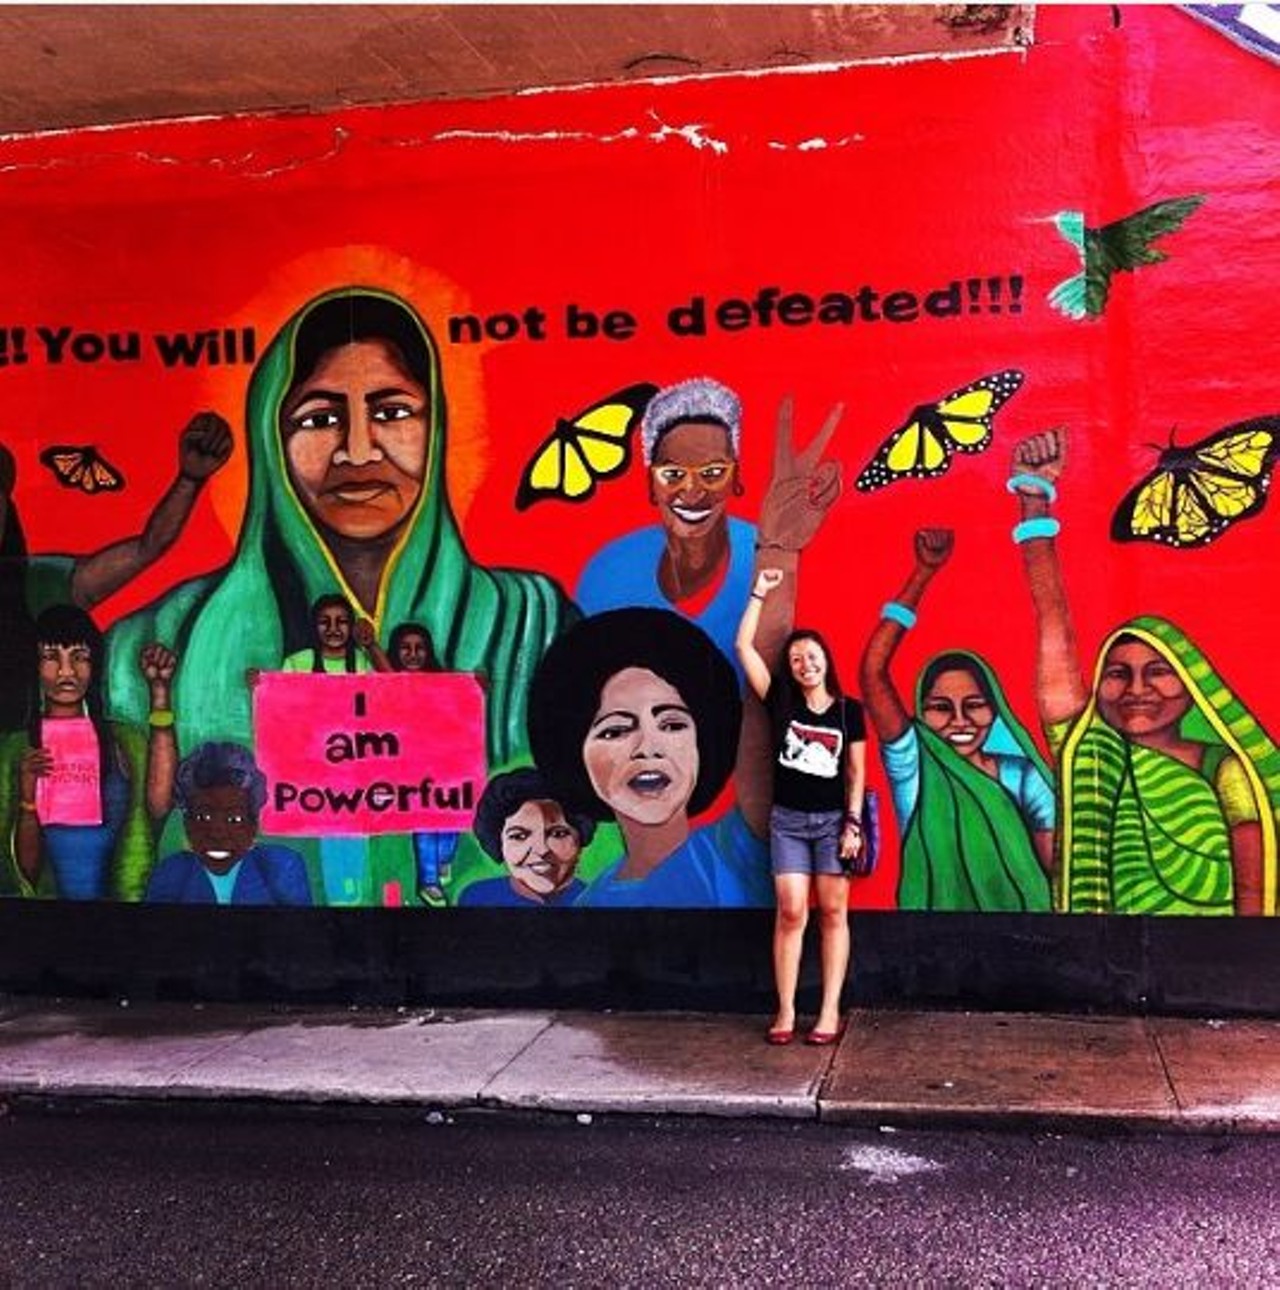 Martinez Street Women&#146;s Center
801 N Olive St.
Admire the feminist street art and empower your followers to do the same.
Photo via Instagram 
thexicanaexplorer
